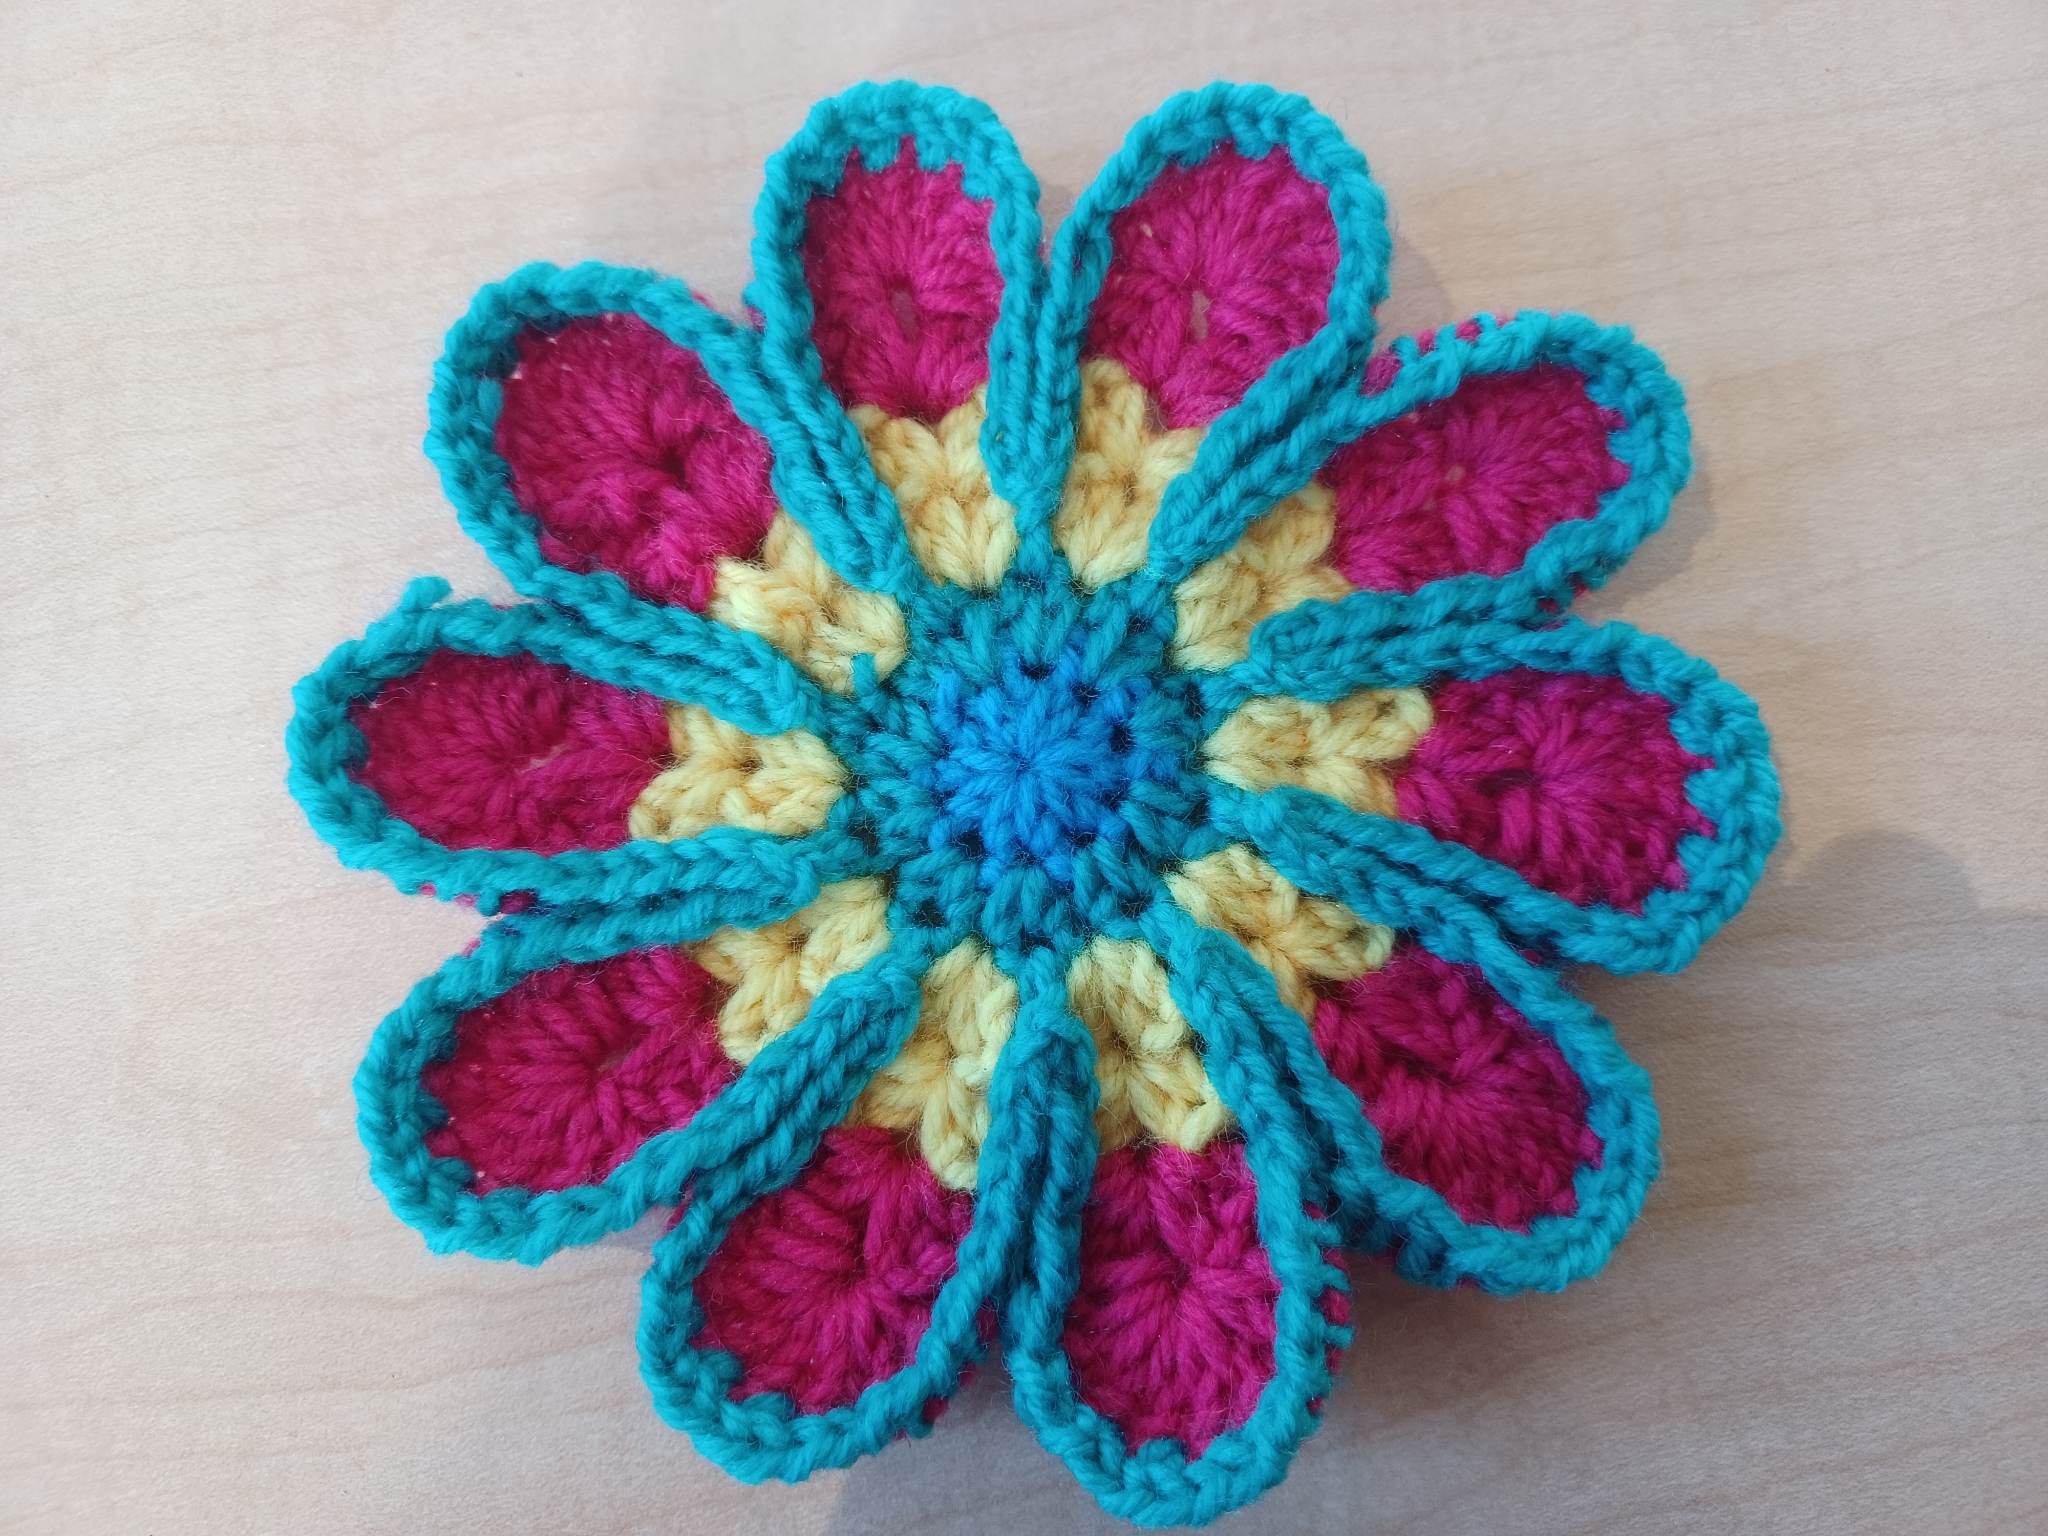 Crocheted flower with multiple colors